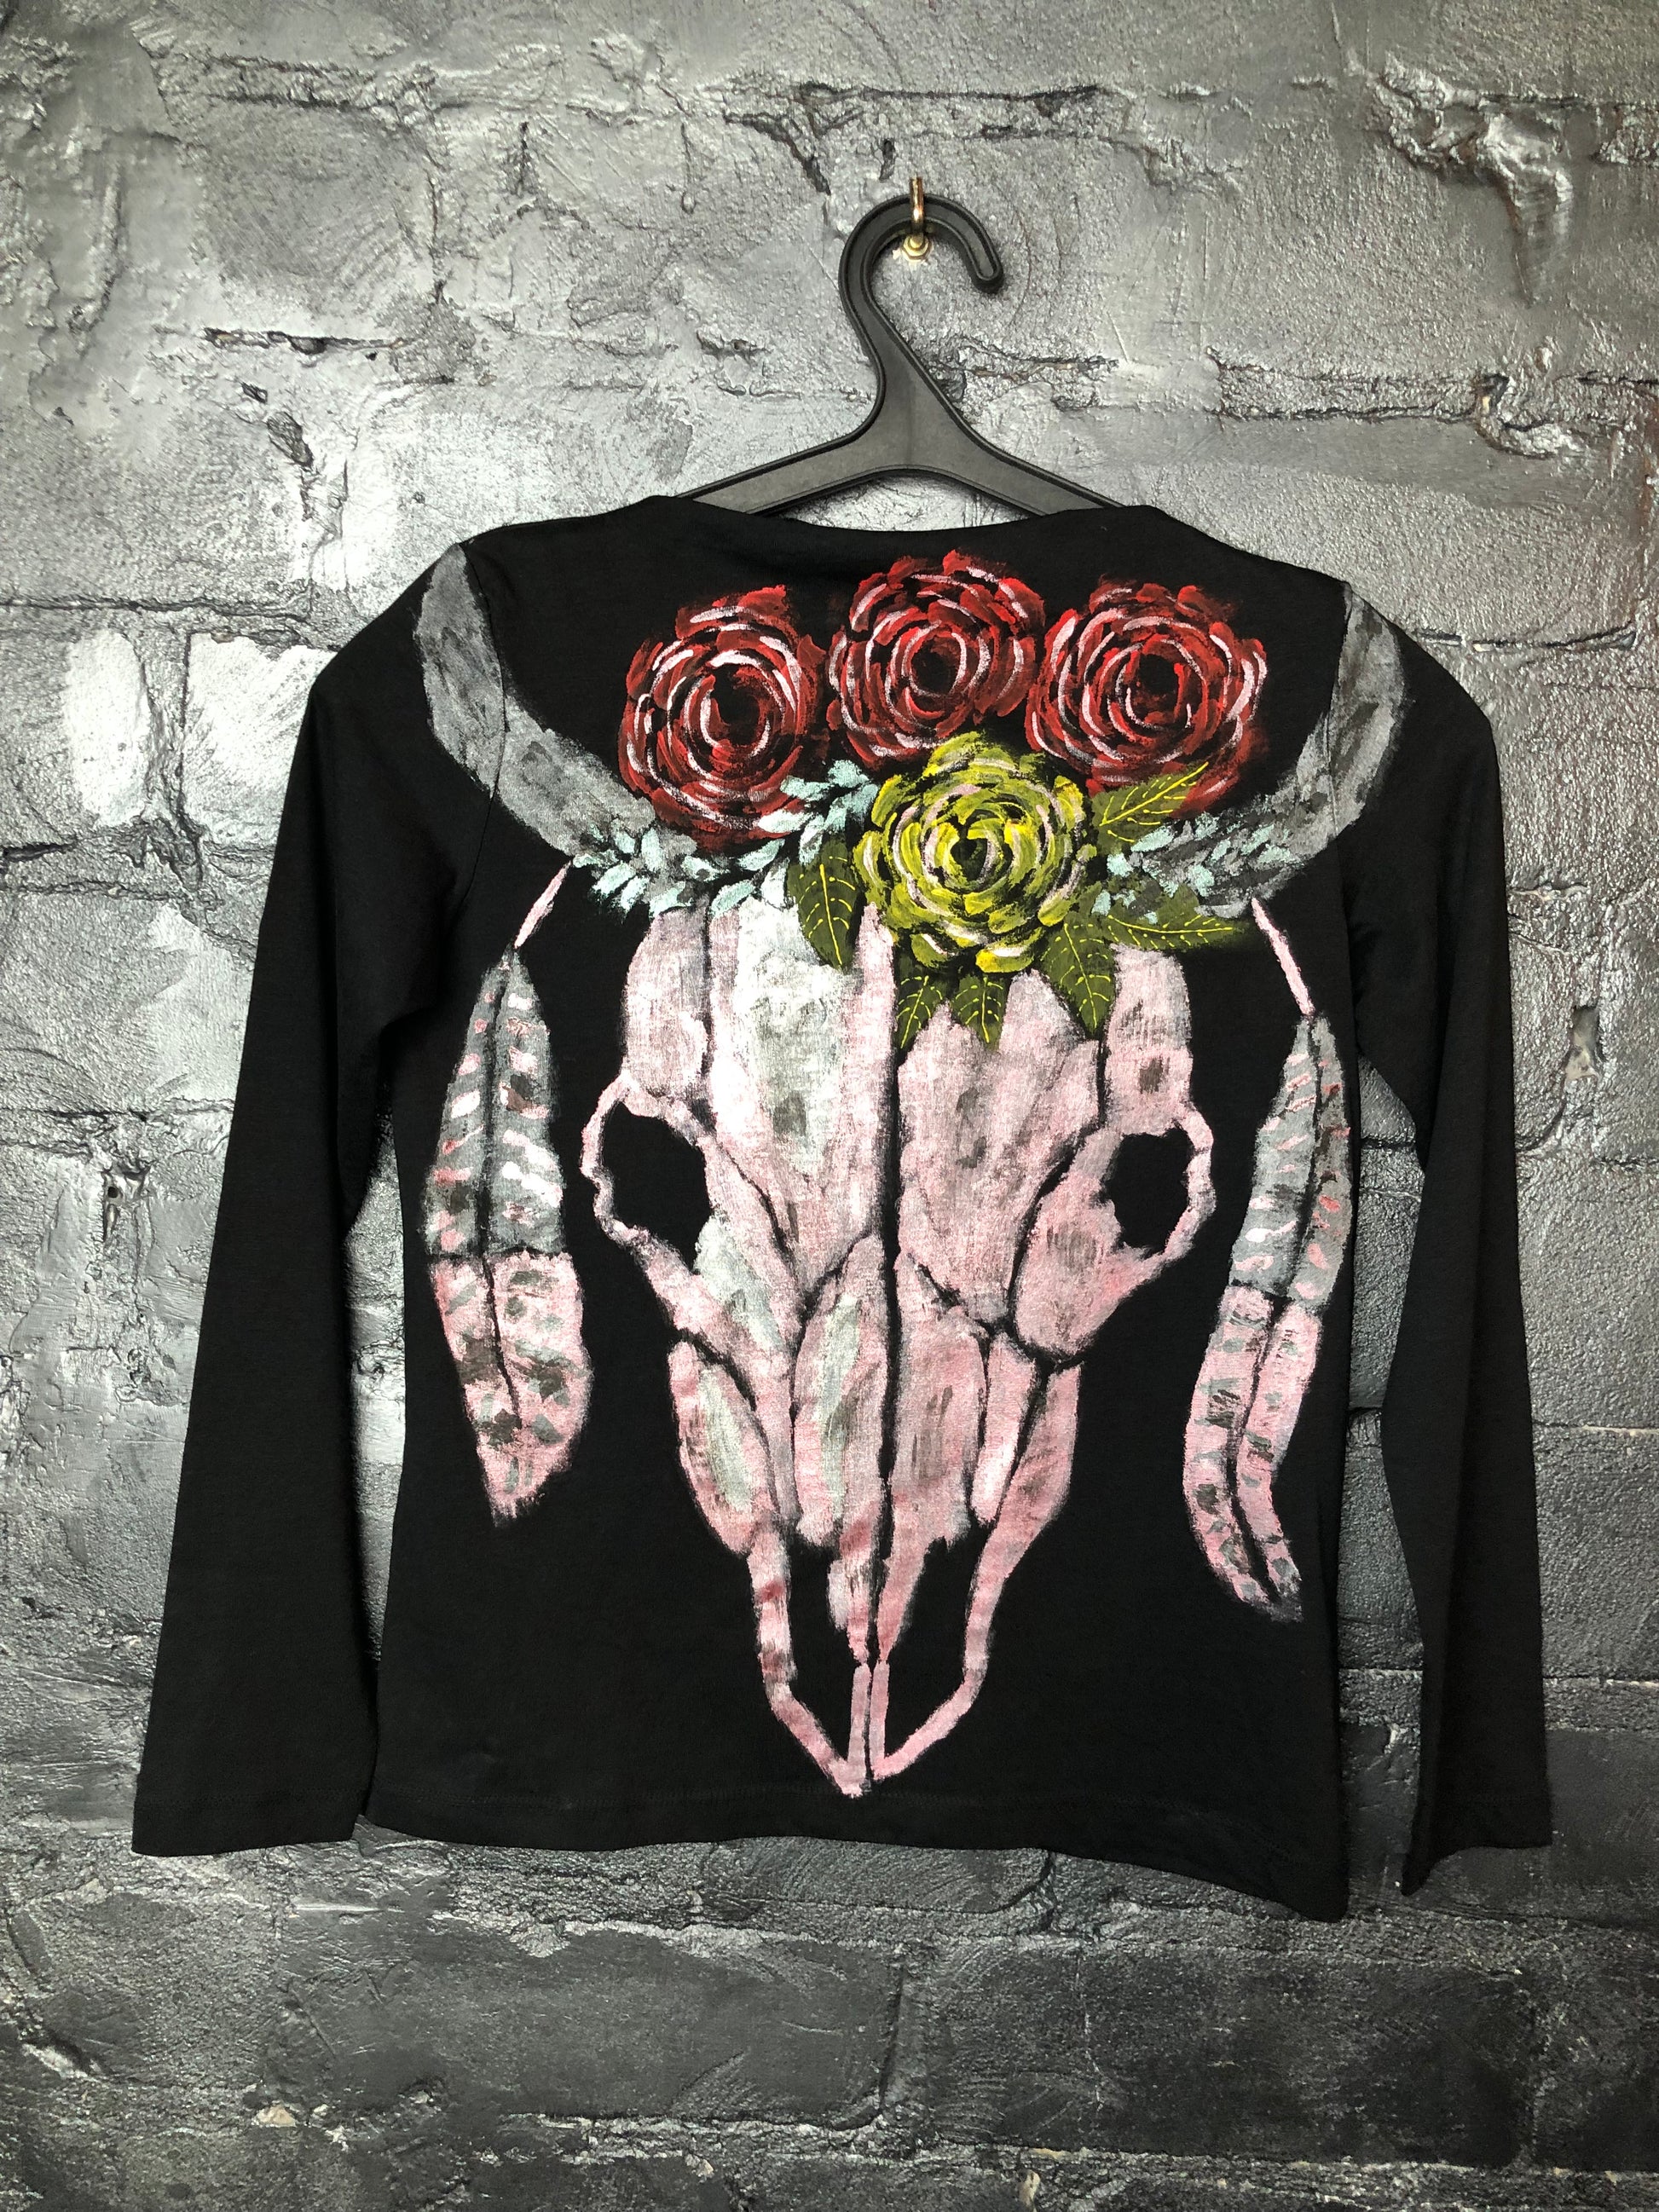 Women's long sleeve black T-shirt with a pattern of a skull, horns, feathers and flowers.